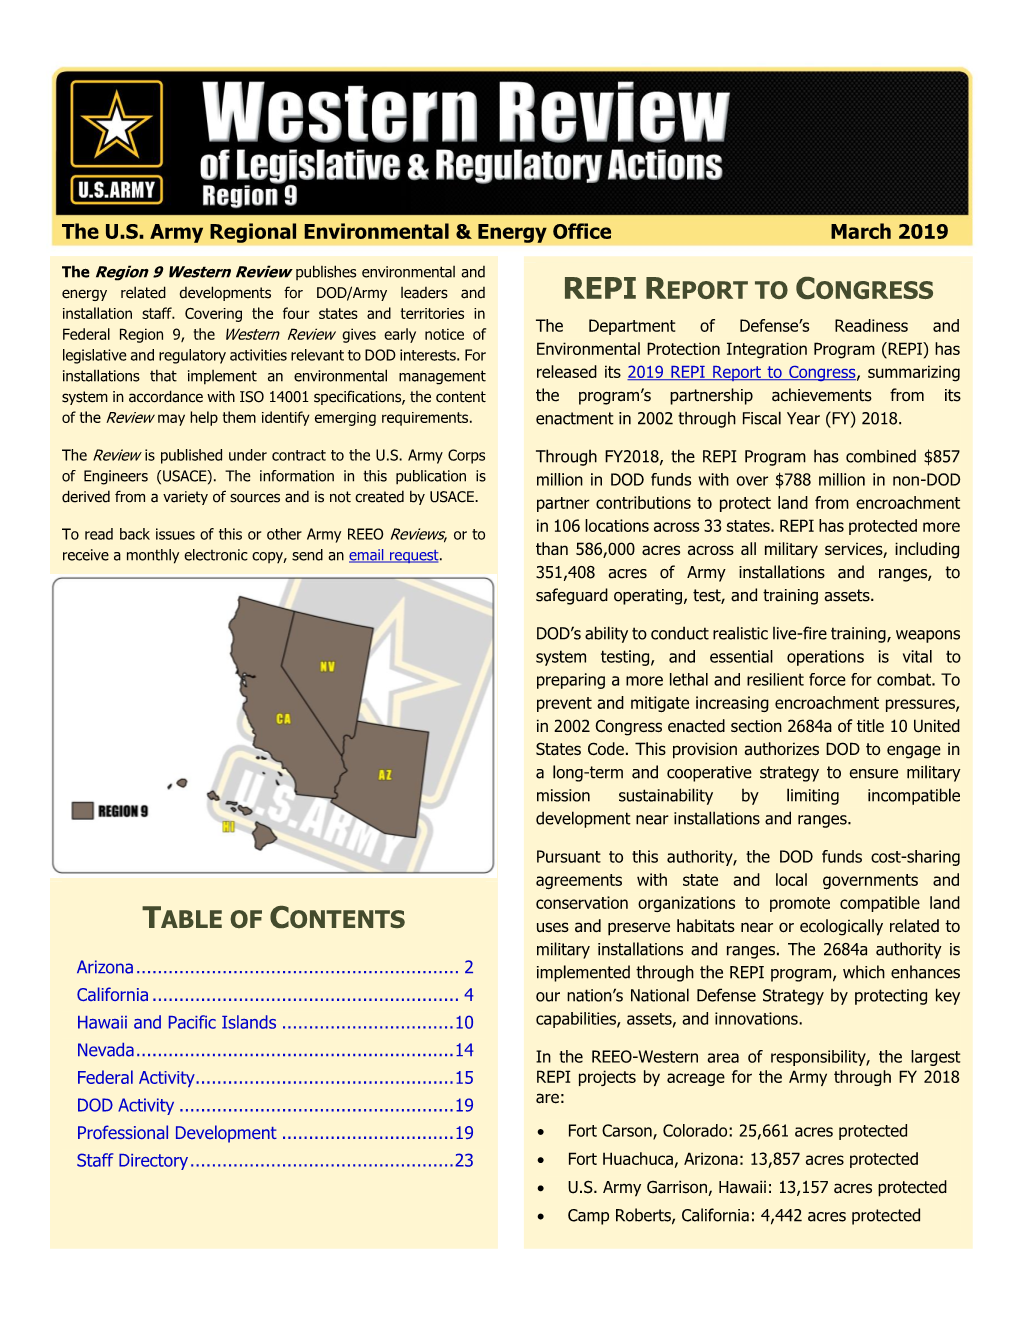 Repi Report to Congress Table of Contents